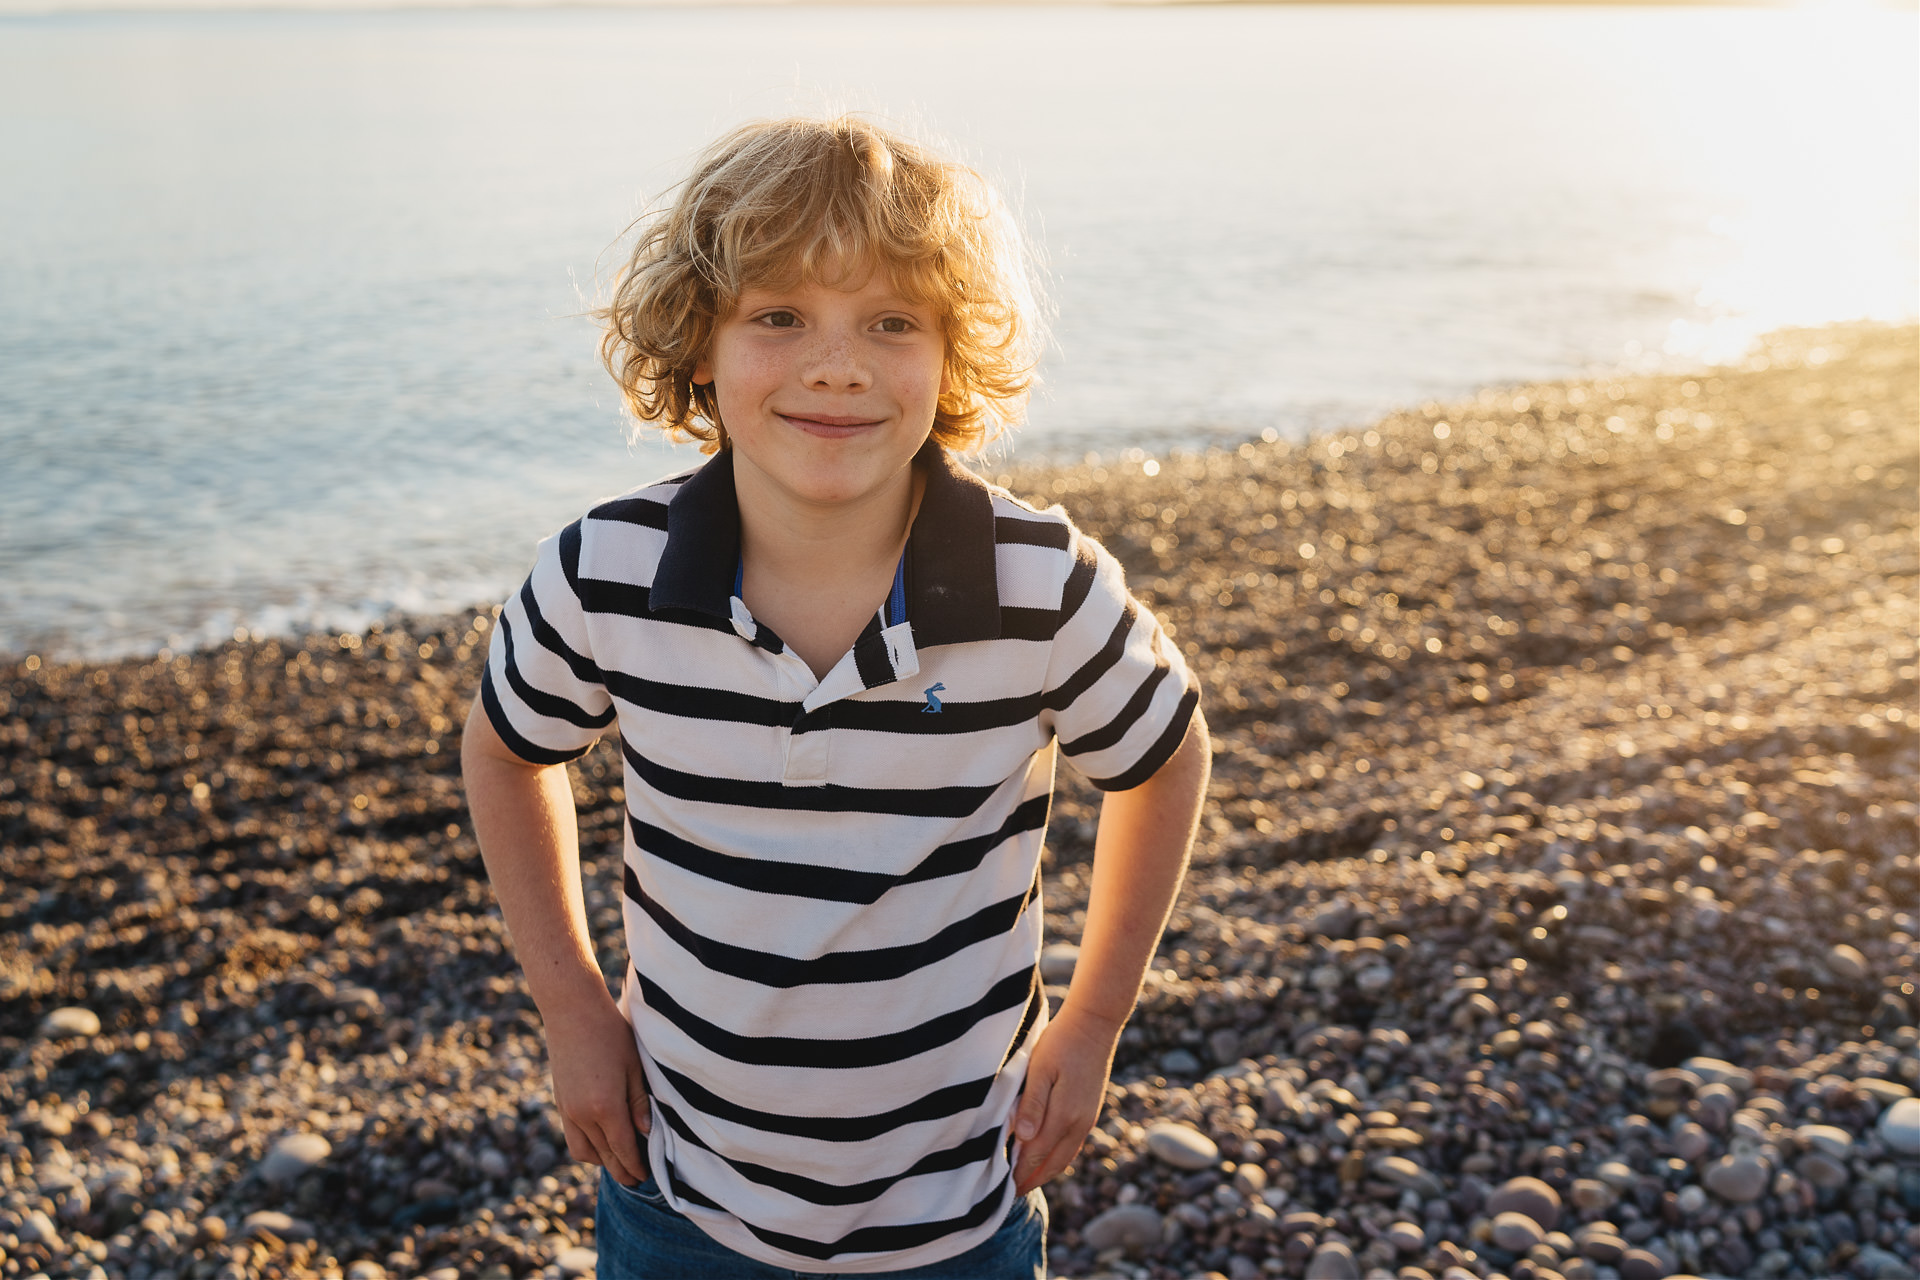 A boy smiling on the beach with sun setting behind